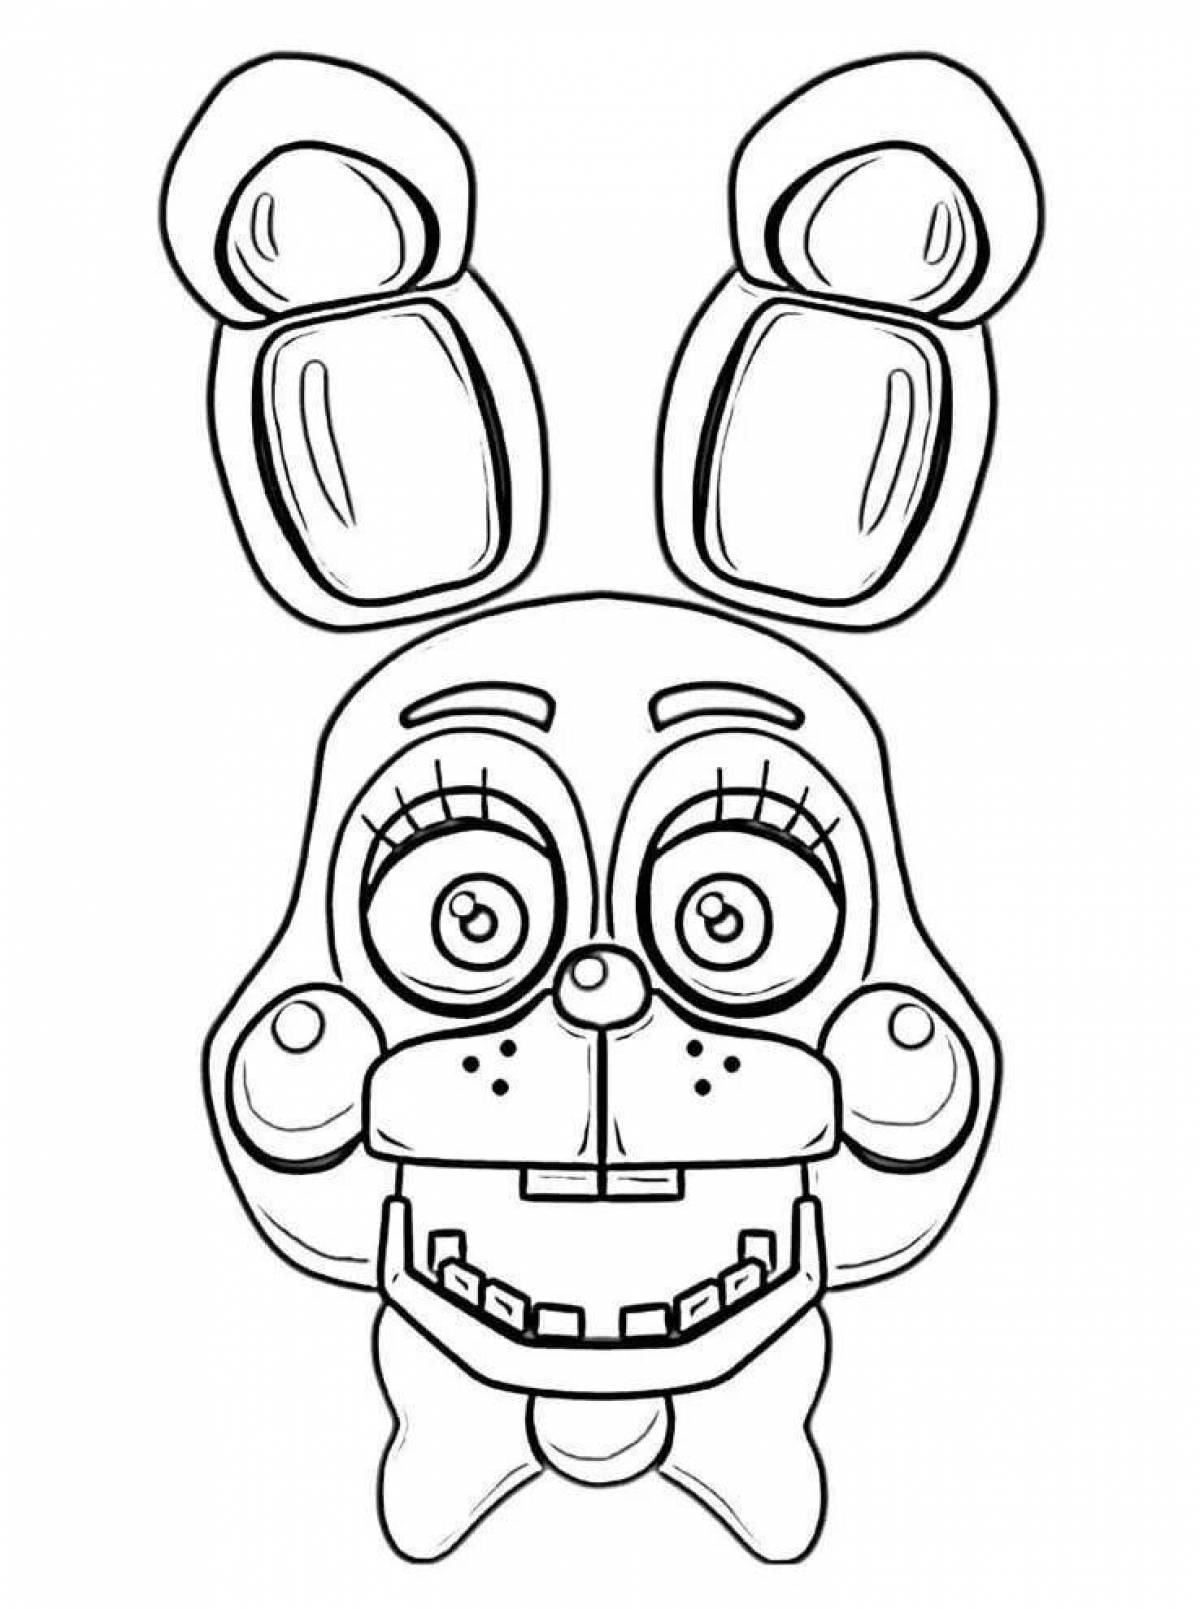 Amazing old bonnie coloring page